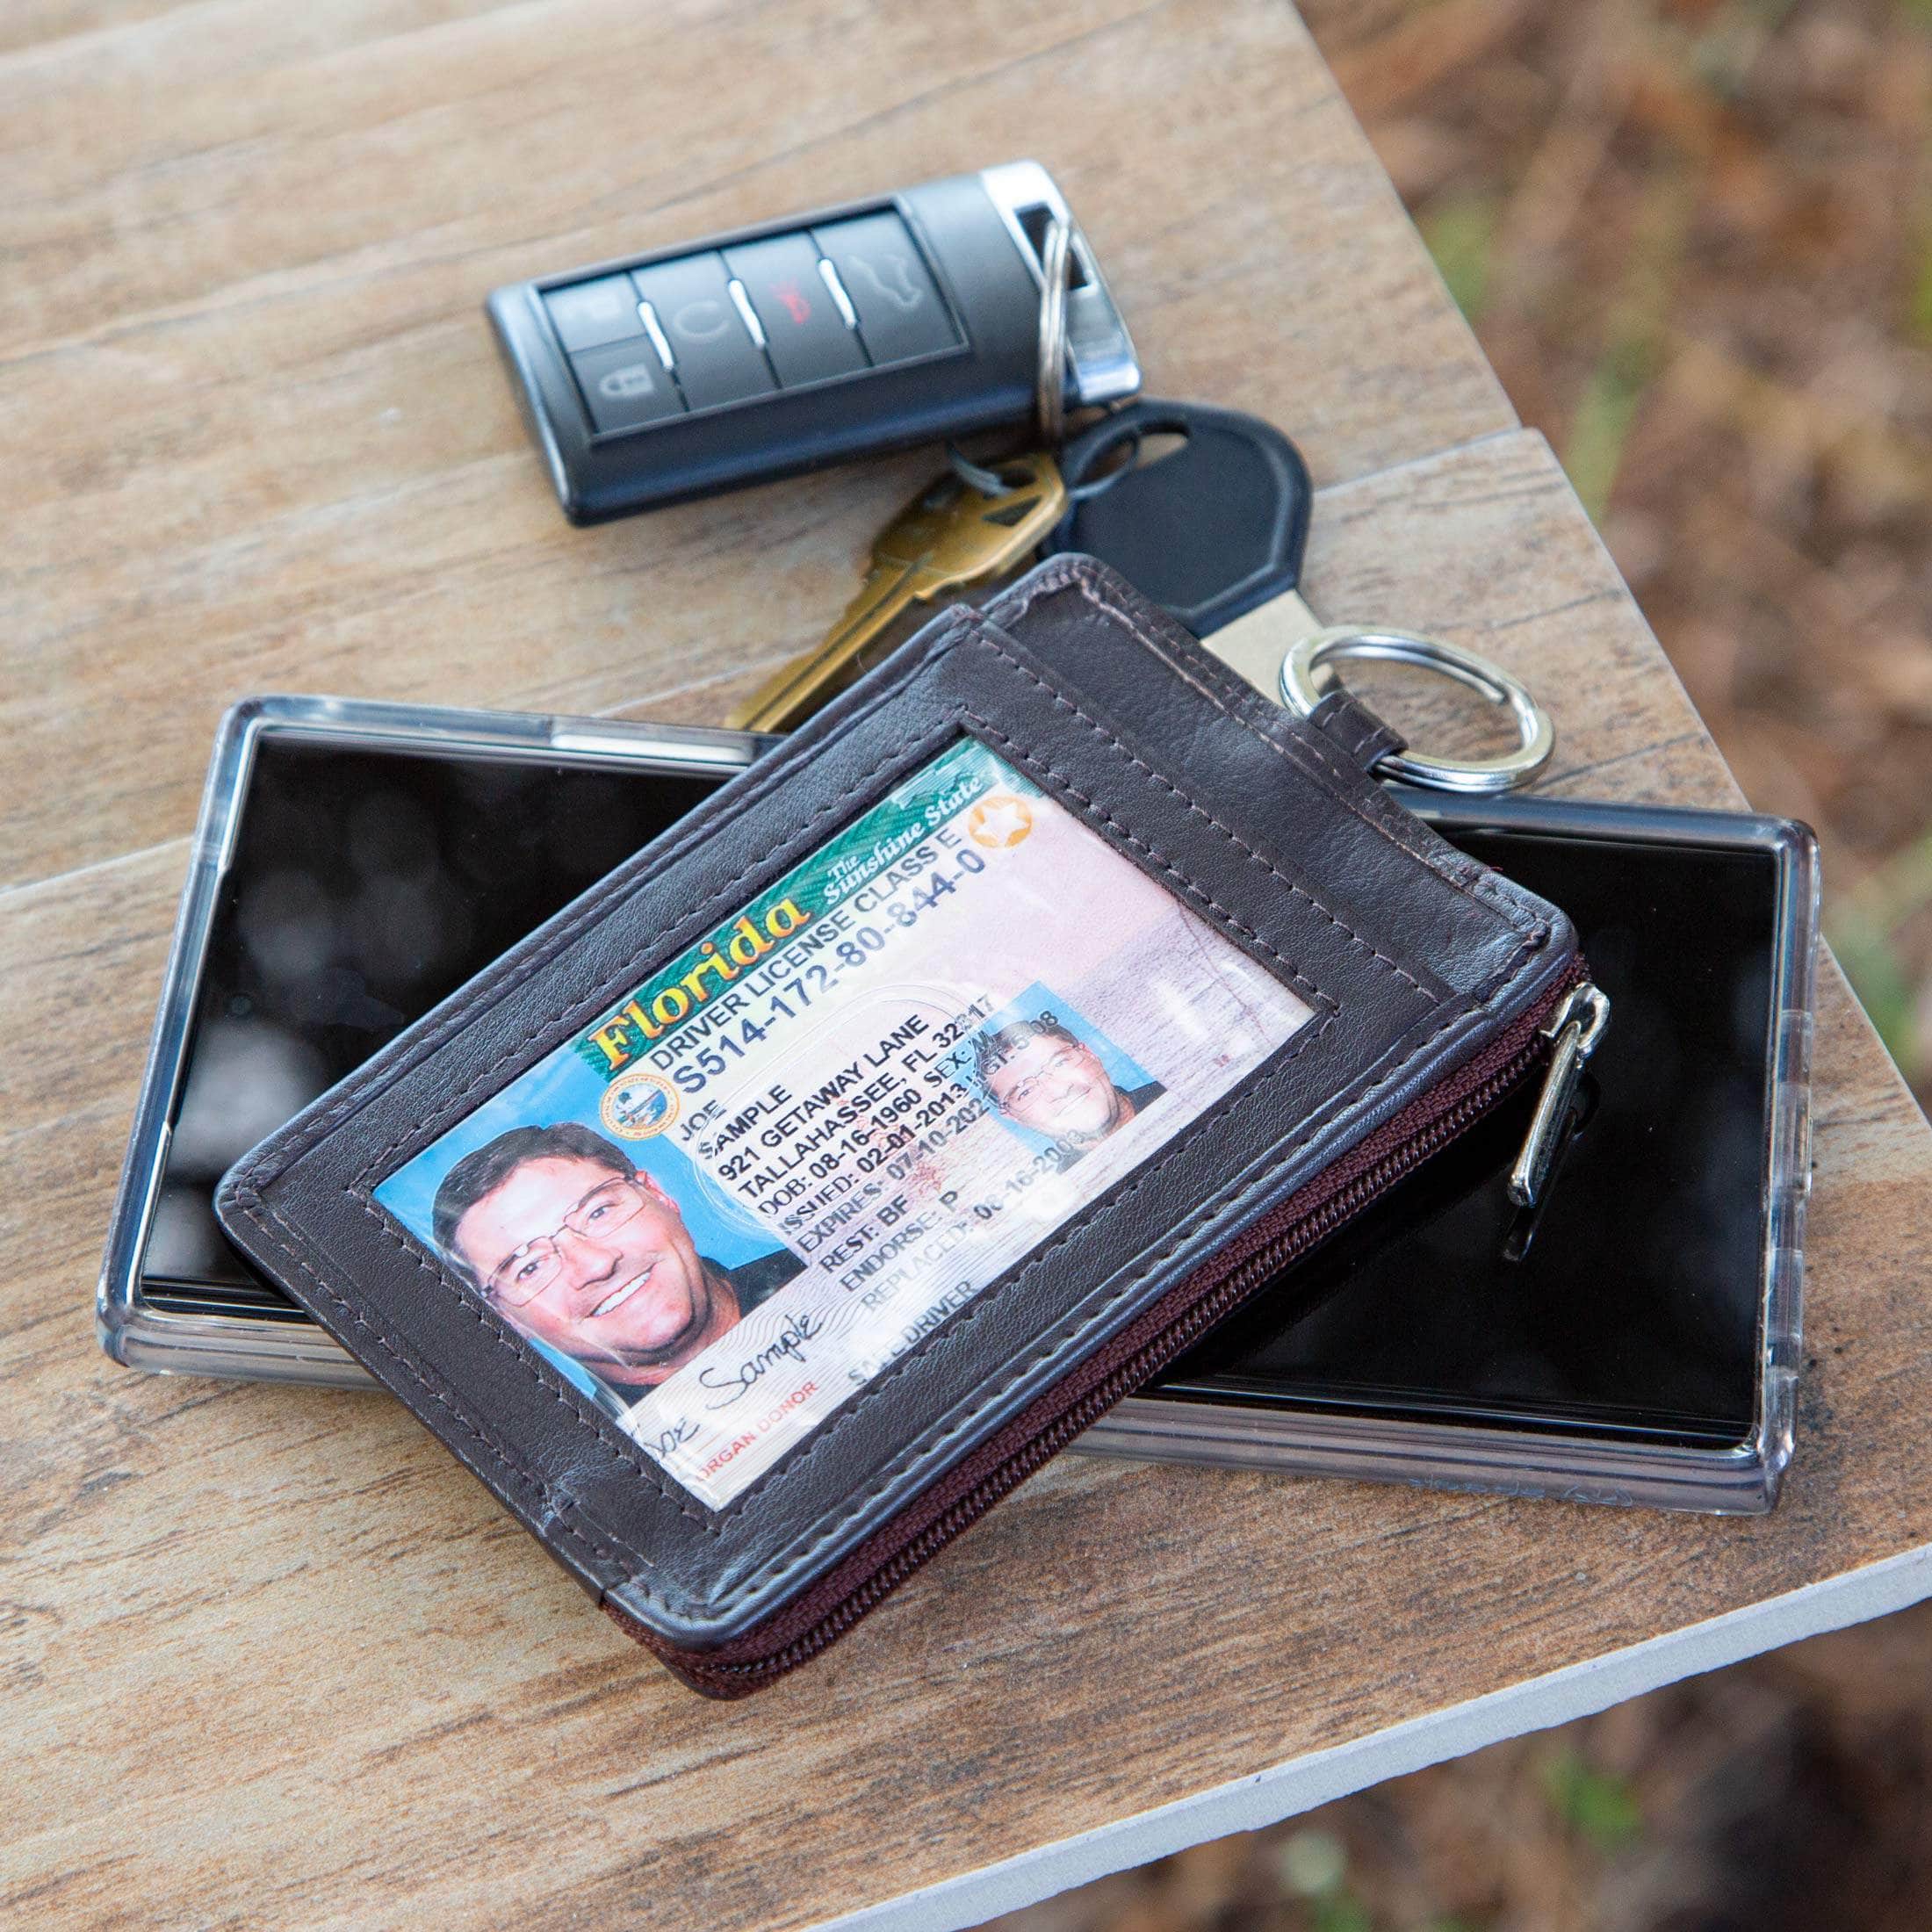 License card holder with keyring  Drivers license, medical aid